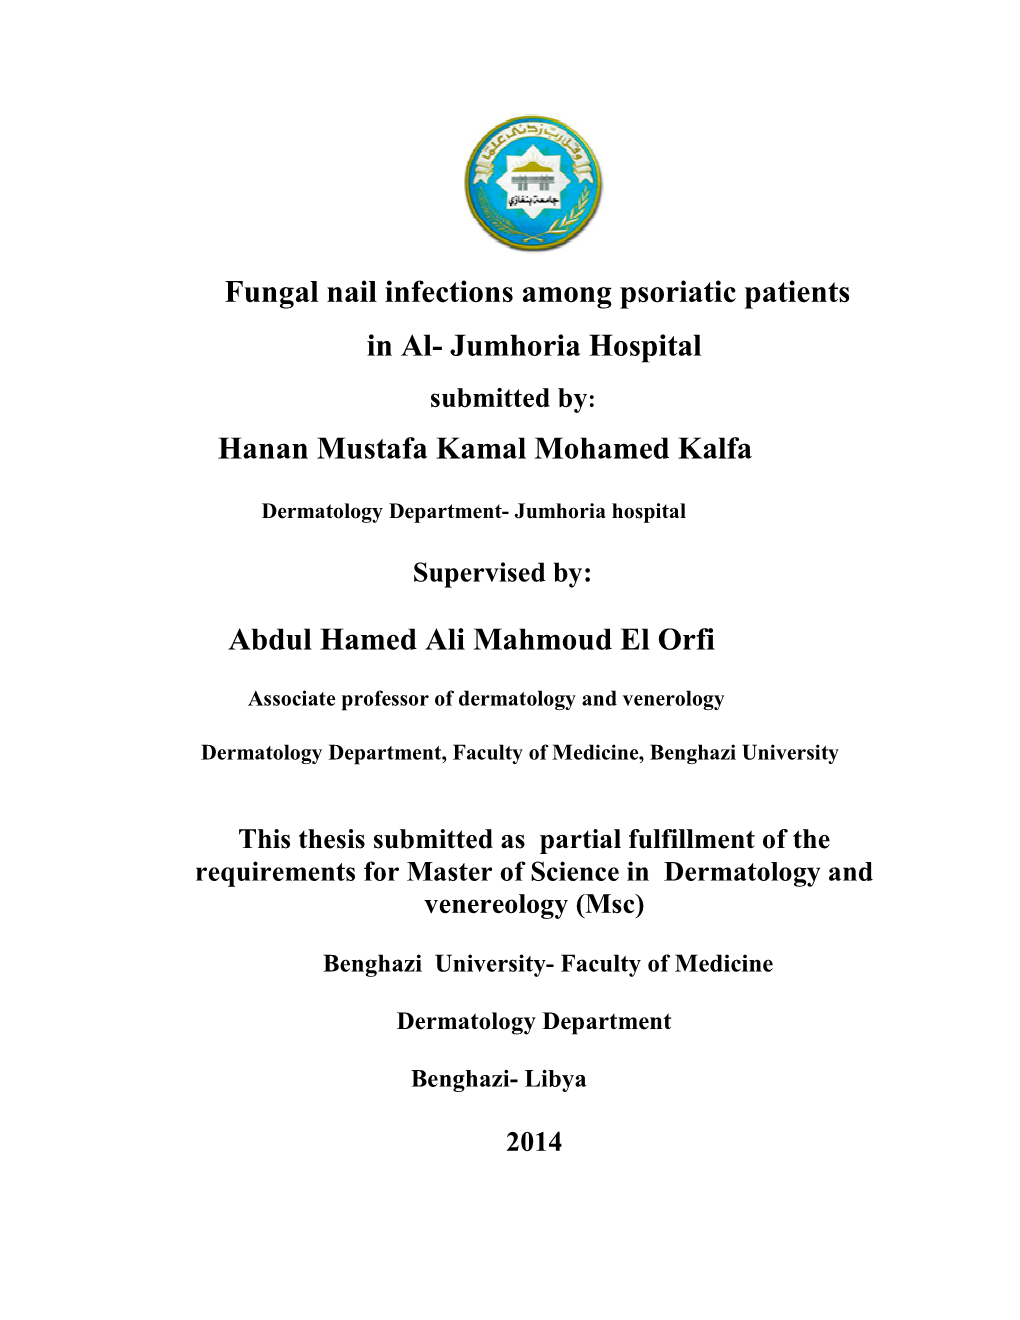 Fungal Nail Infections Among Psoriatic Patients in Al- Jumhoria Hospital Submitted By: Hanan Mustafa Kamal Mohamed Kalfa